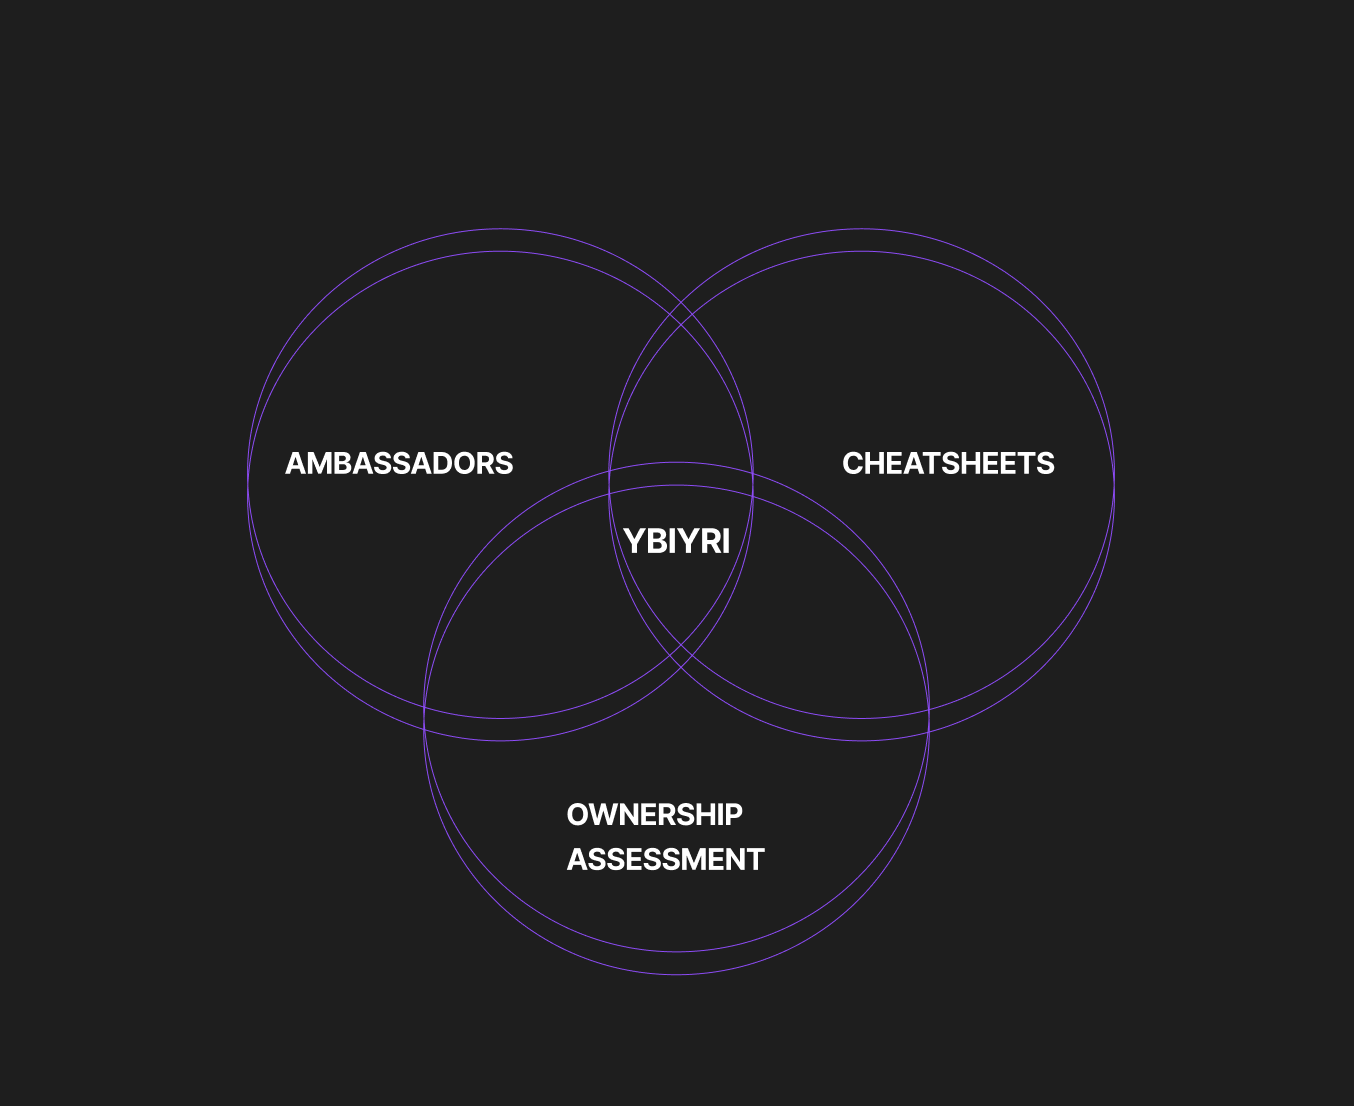  Ownership assessment + cheat sheet + ambassadors (overlapping circles with YBIYRI in the middle)